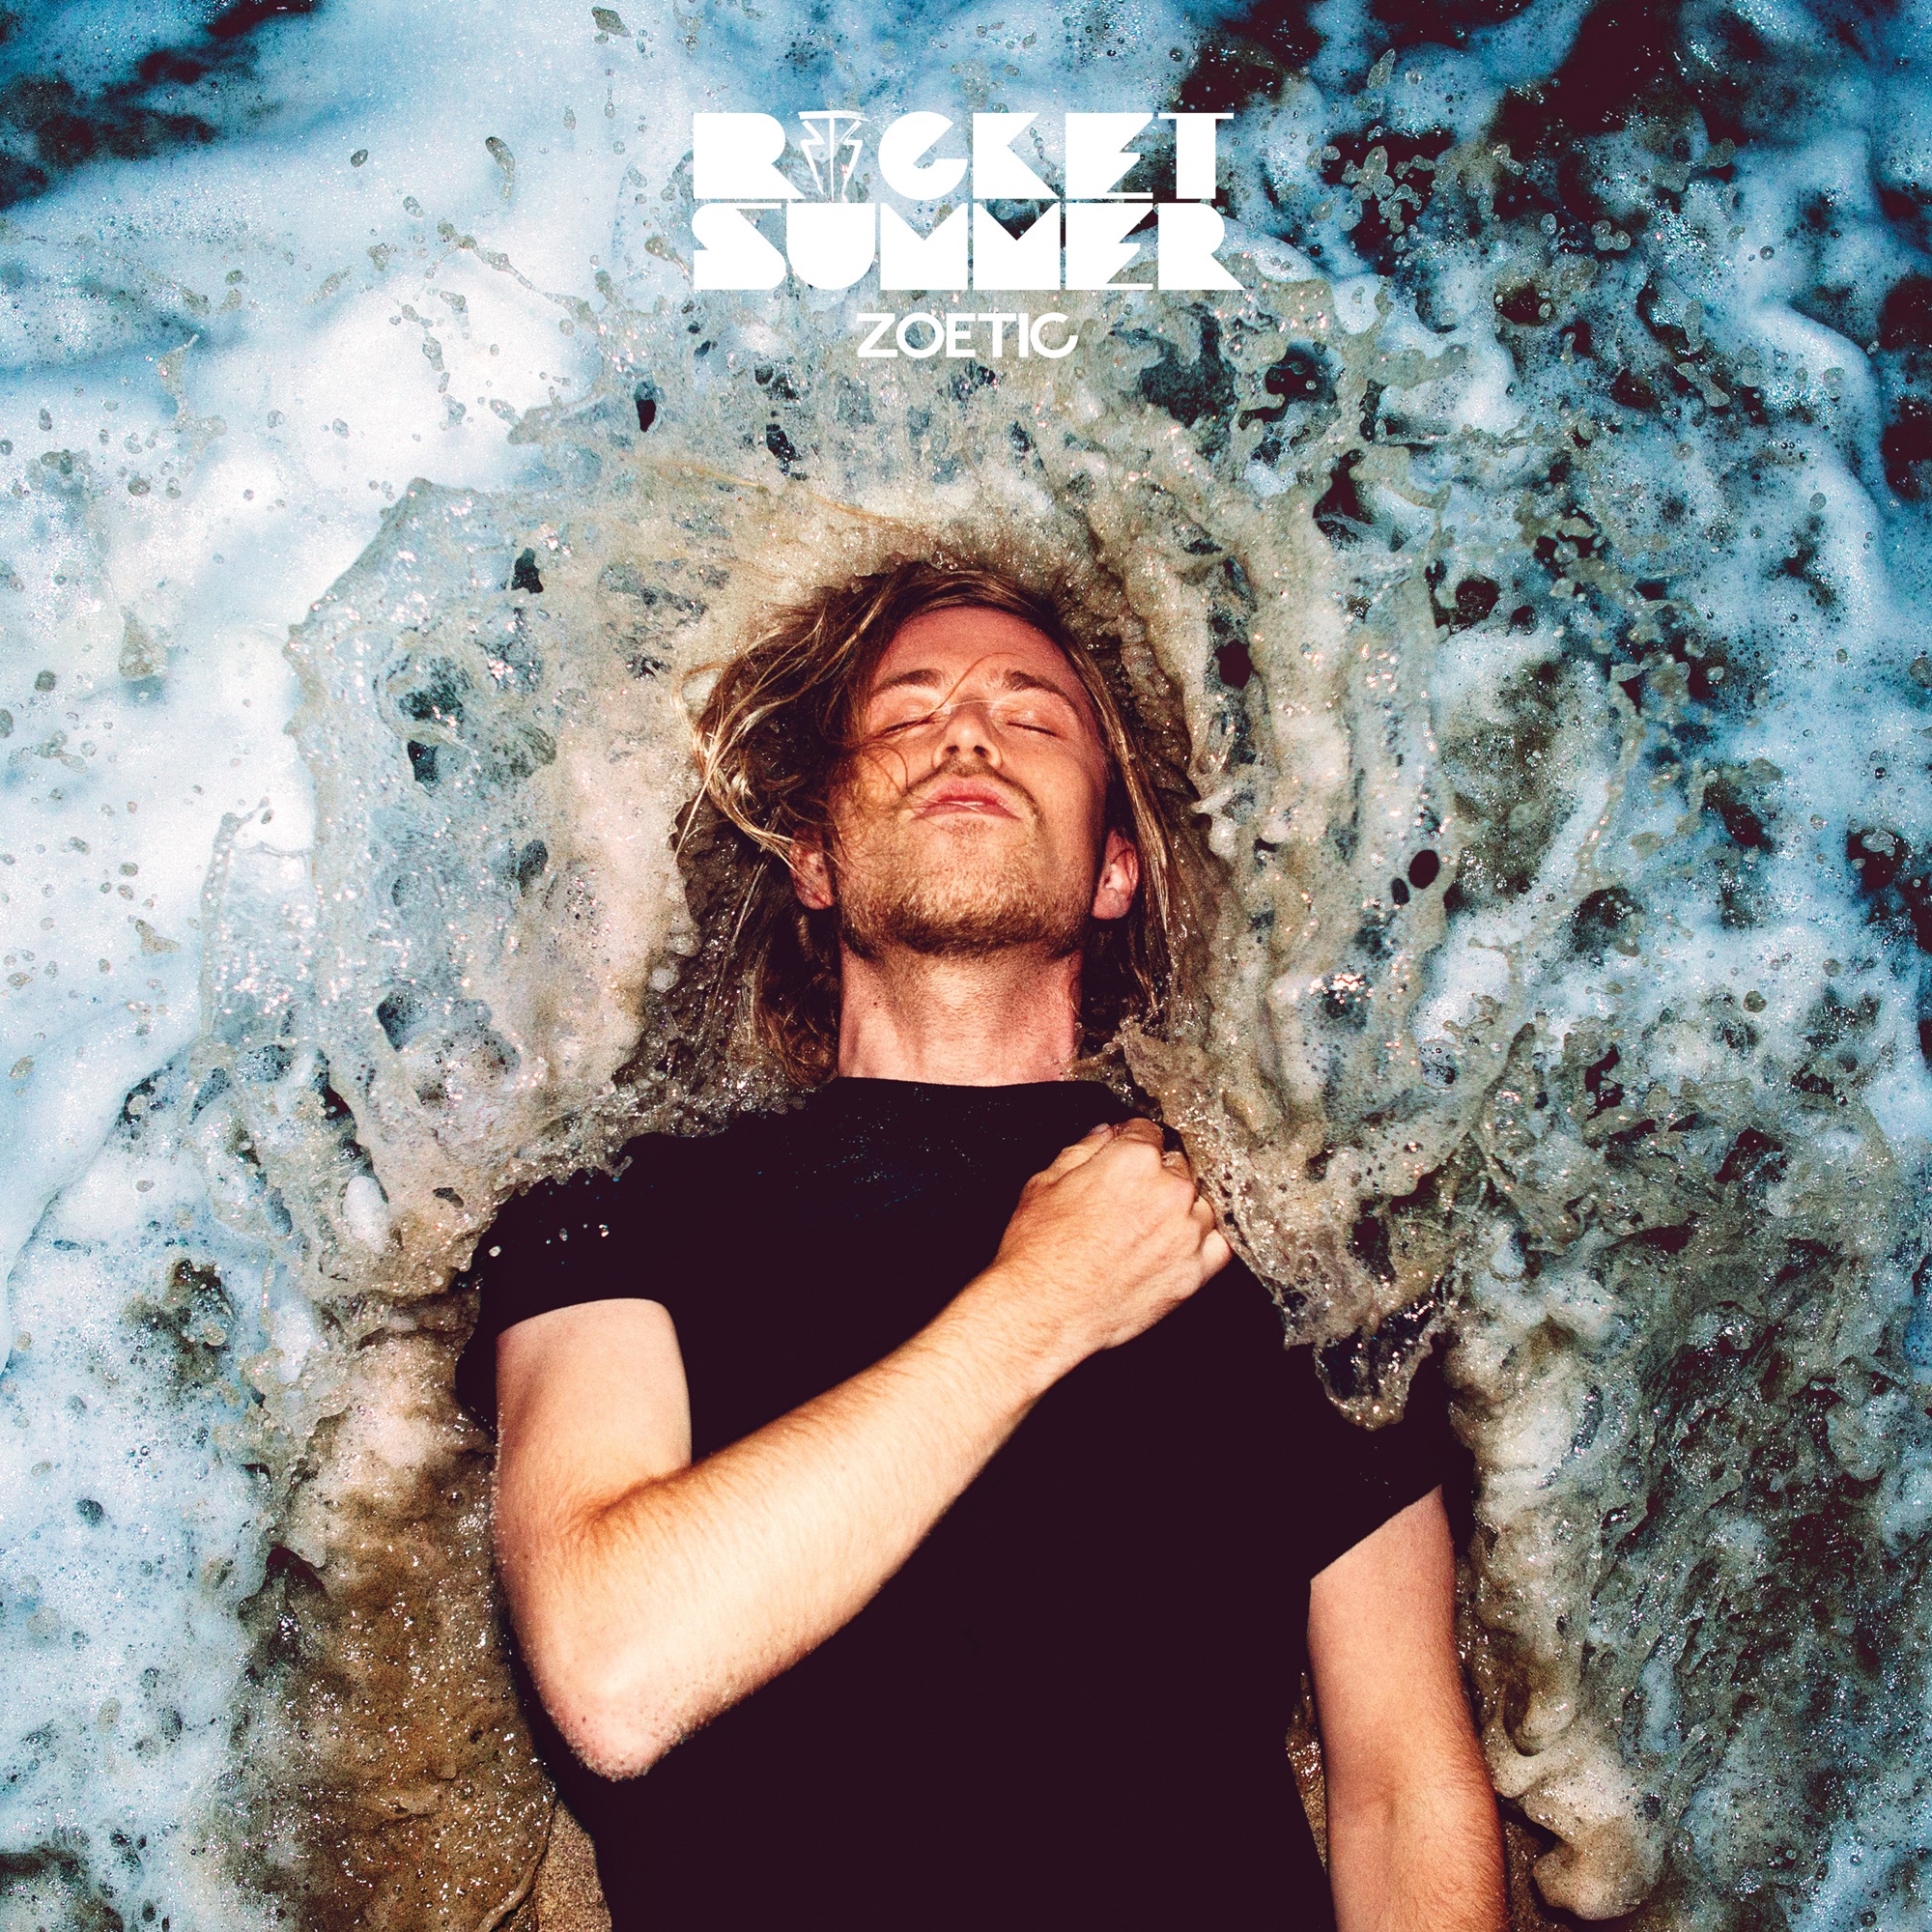 The Rocket Summer Zoetic cover artwork